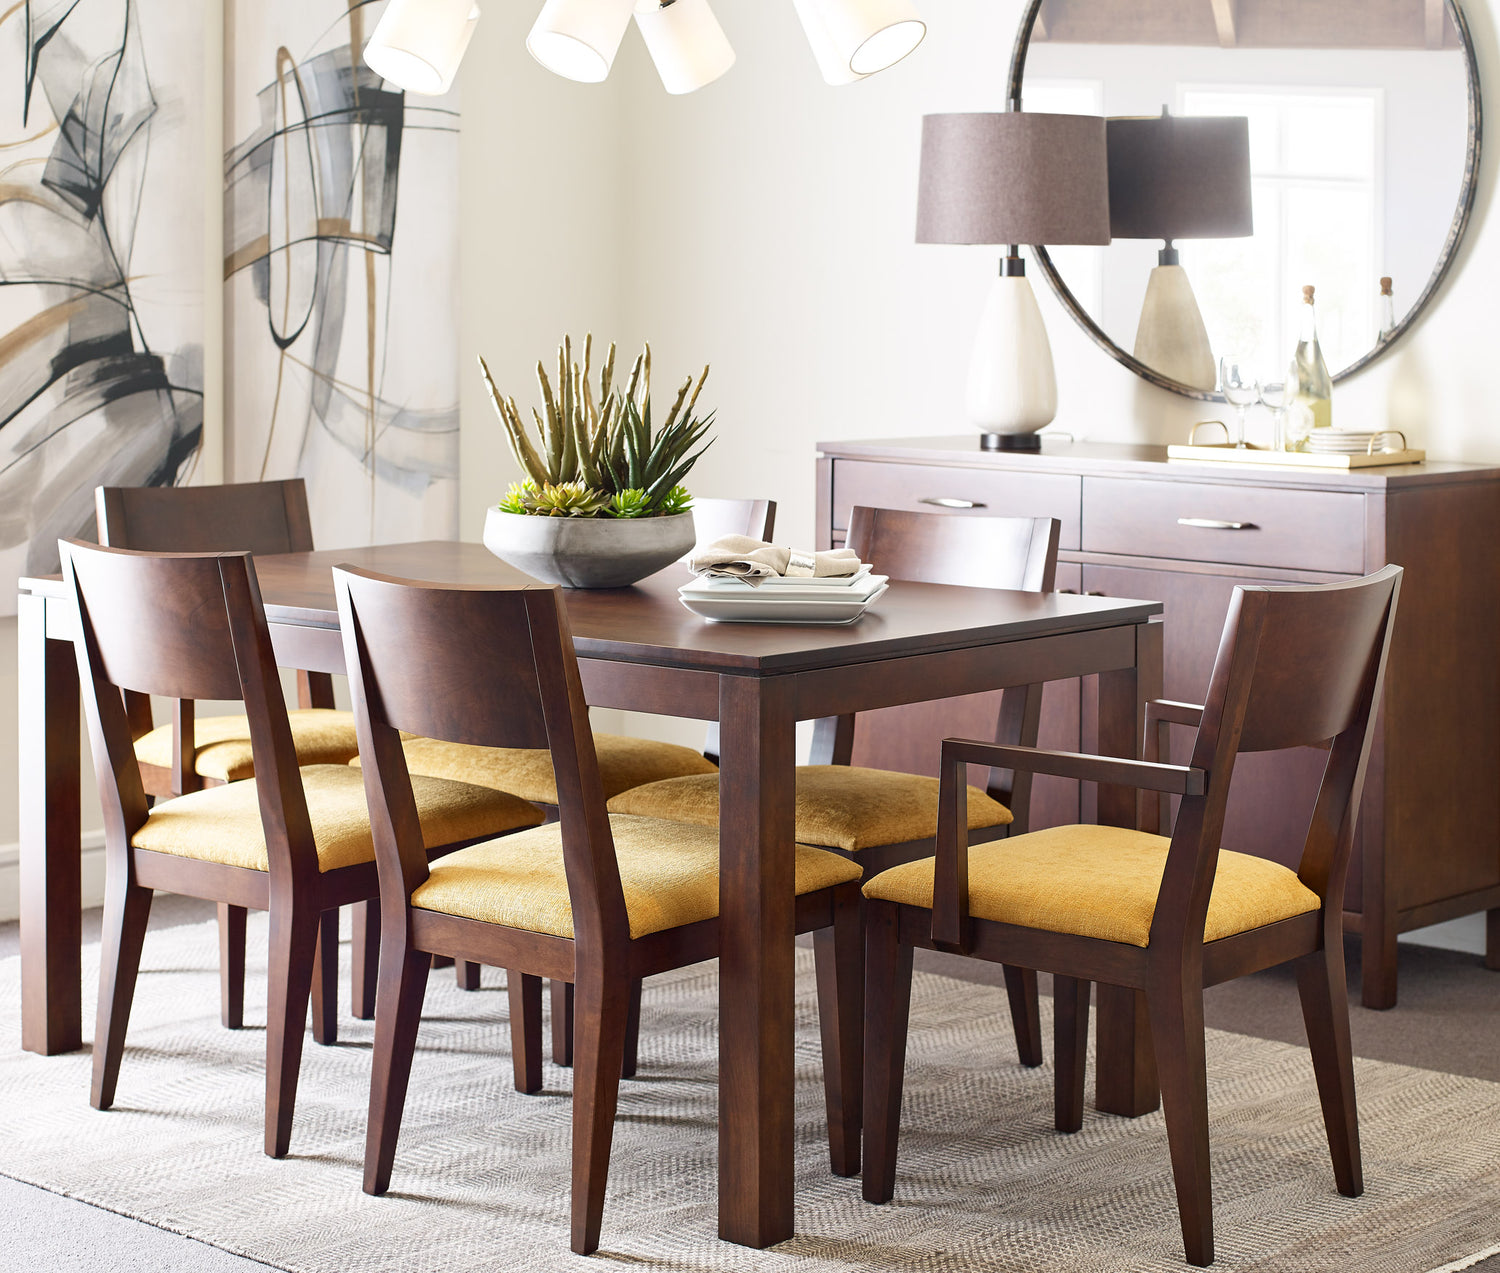 Origins by Stickley Dwyer dining room table, chairs, and side table